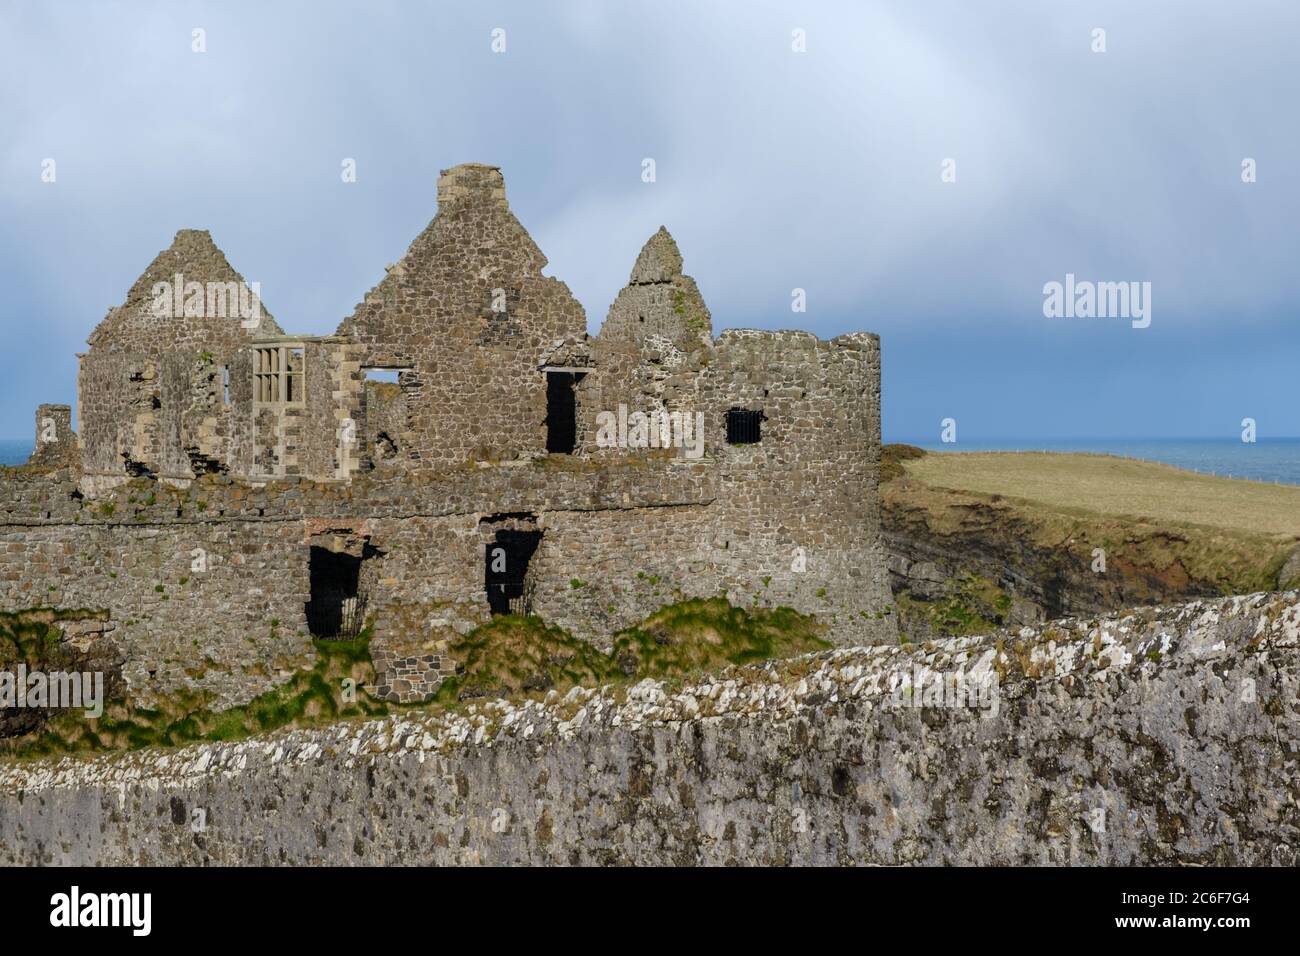 The ruins of Dunluce Castle at Dunluce near Portrush in County Antrim, Northern Ireland. Dunluce was used in TV series Game of Thrones as a location Stock Photo